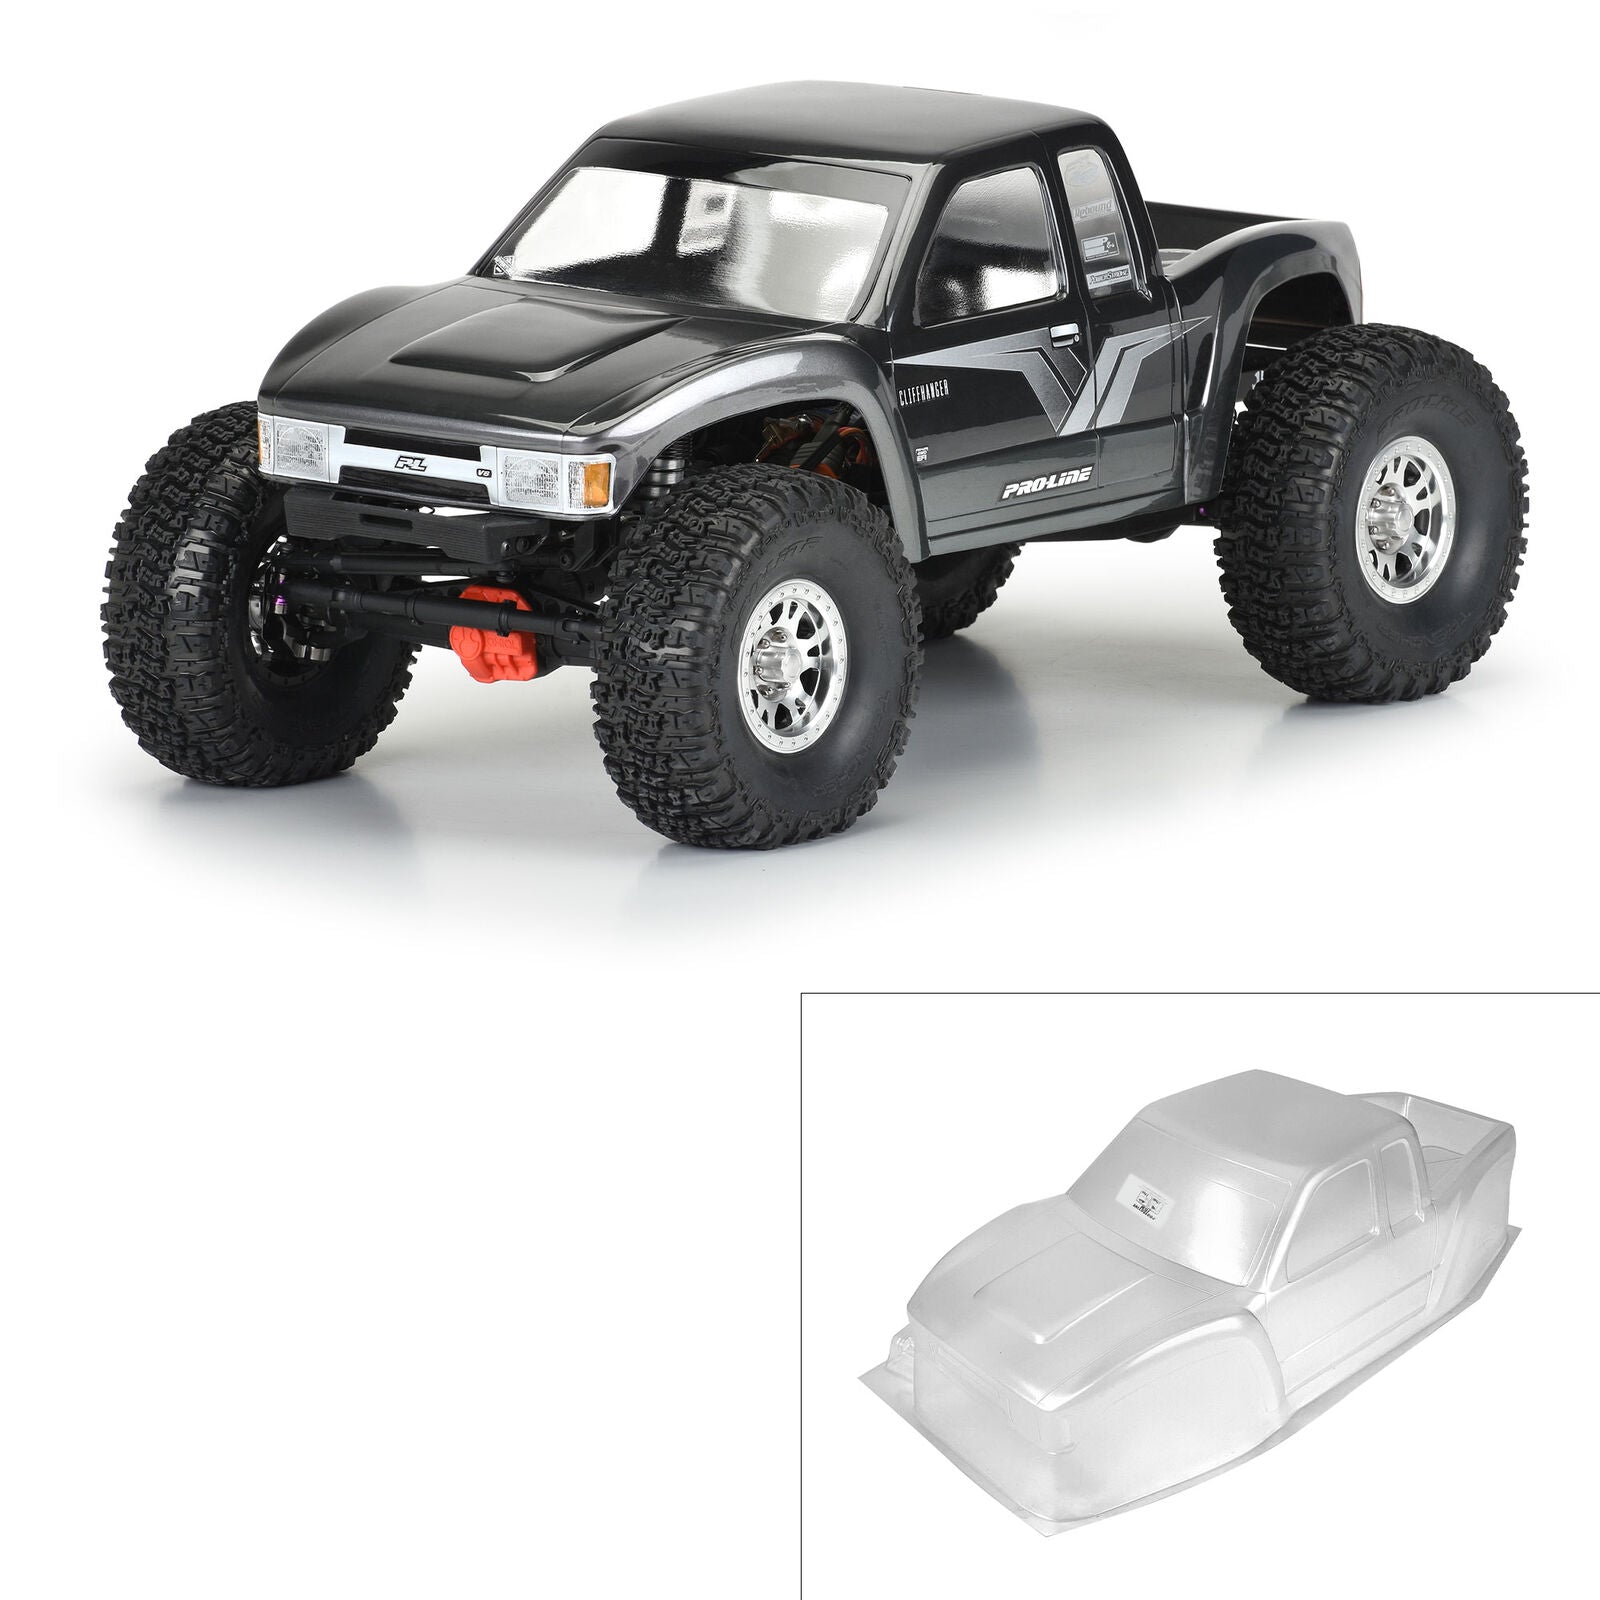 PROLINE 3566-00 1/10 Cliffhanger High Performance Clear Body 12.3" (313mm) wheelbase for crawlers